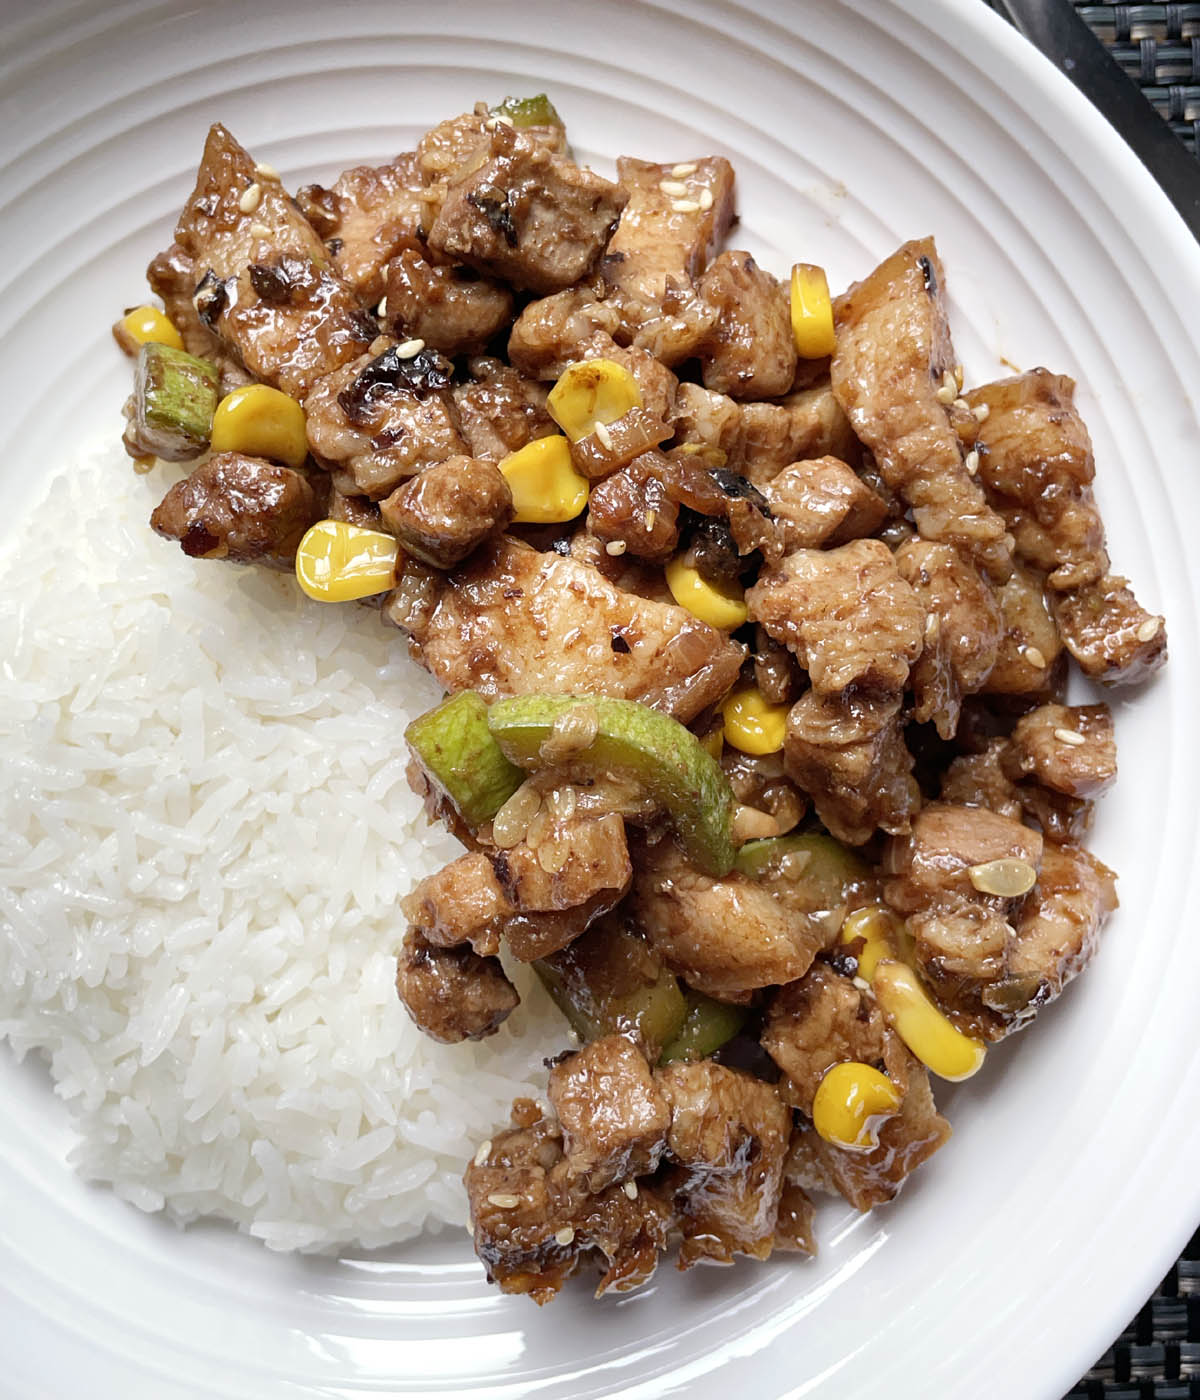 A round white bowl containing cooked white rice and black bean garlic pork belly, green zucchini, and yellow corn.